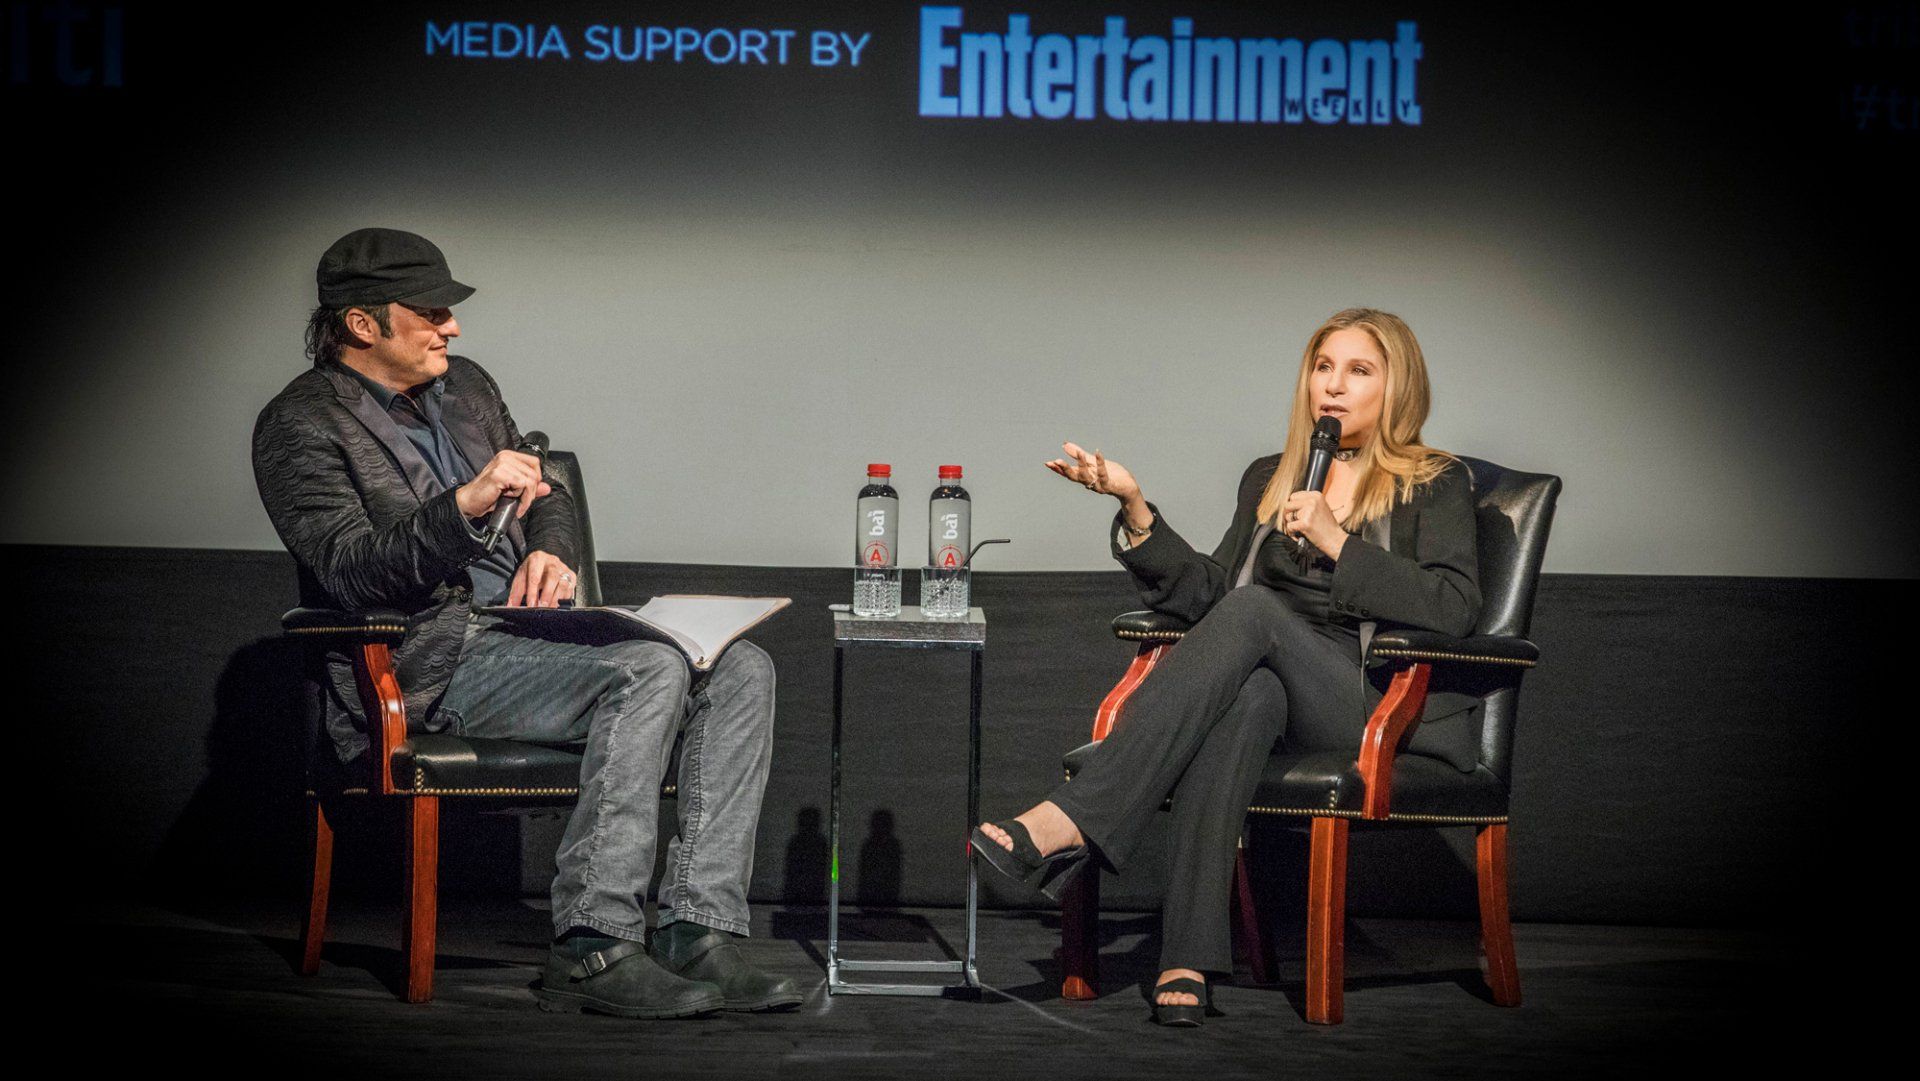 Robert Rodriguez and Barbra Streisand on stage.